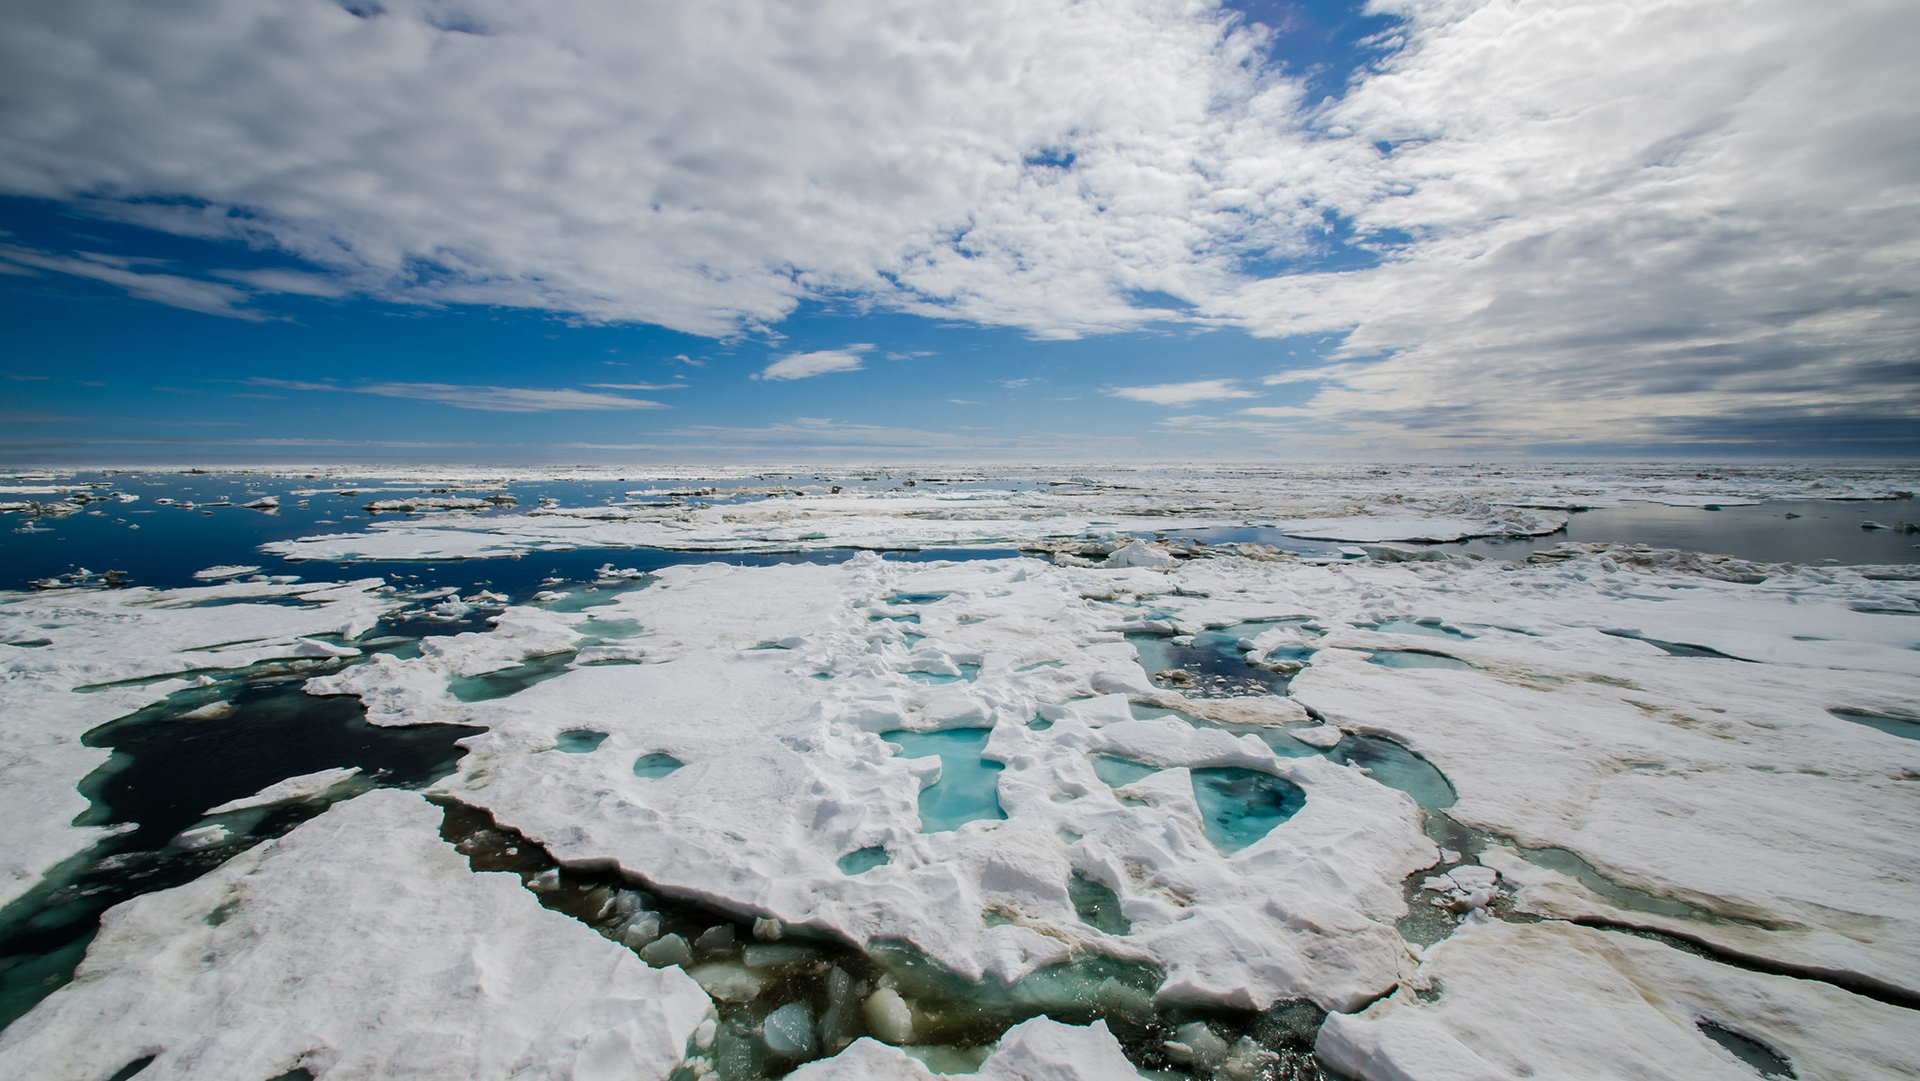 Zombie fires and vanishing sea ice in the Arctic may be permanent